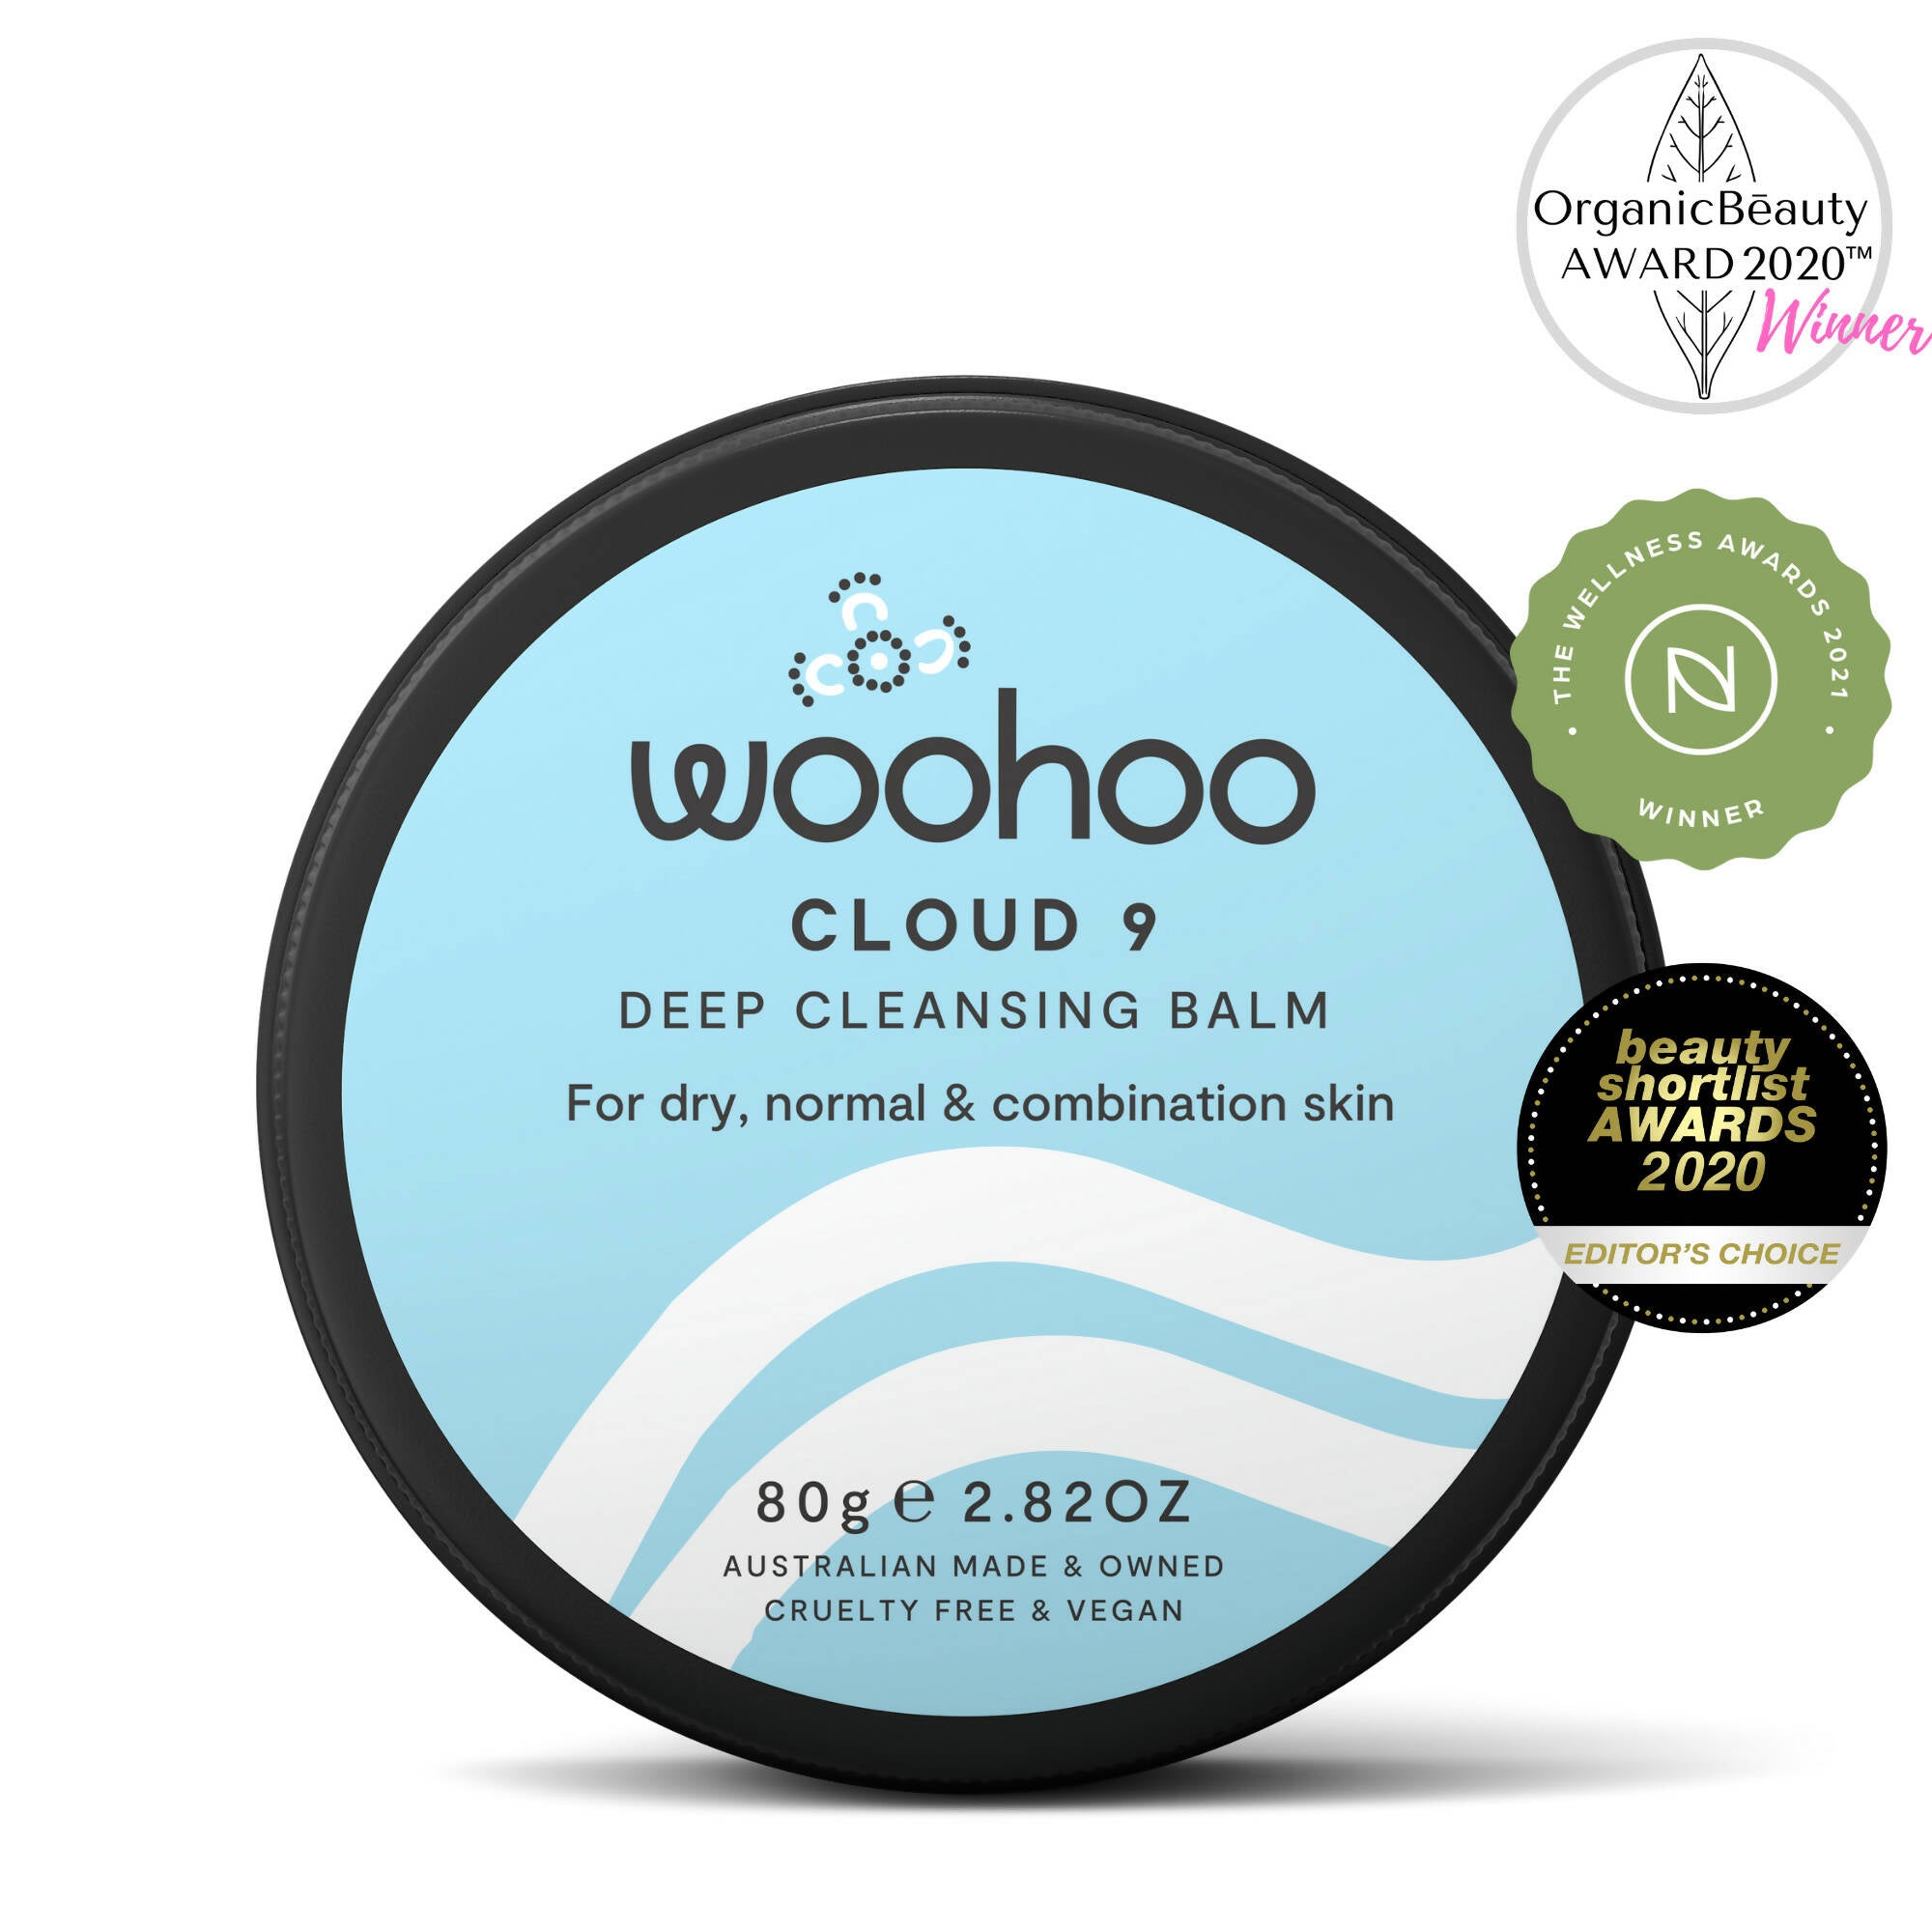 Image of the Woohoo Cloud 9 Deep Cleansing Balm Tin on a white background with Organic Beauty Award 2020 Winner, The Wellness Awards Winner and beauty shortlist Awards 2020 Editor's Choice logos